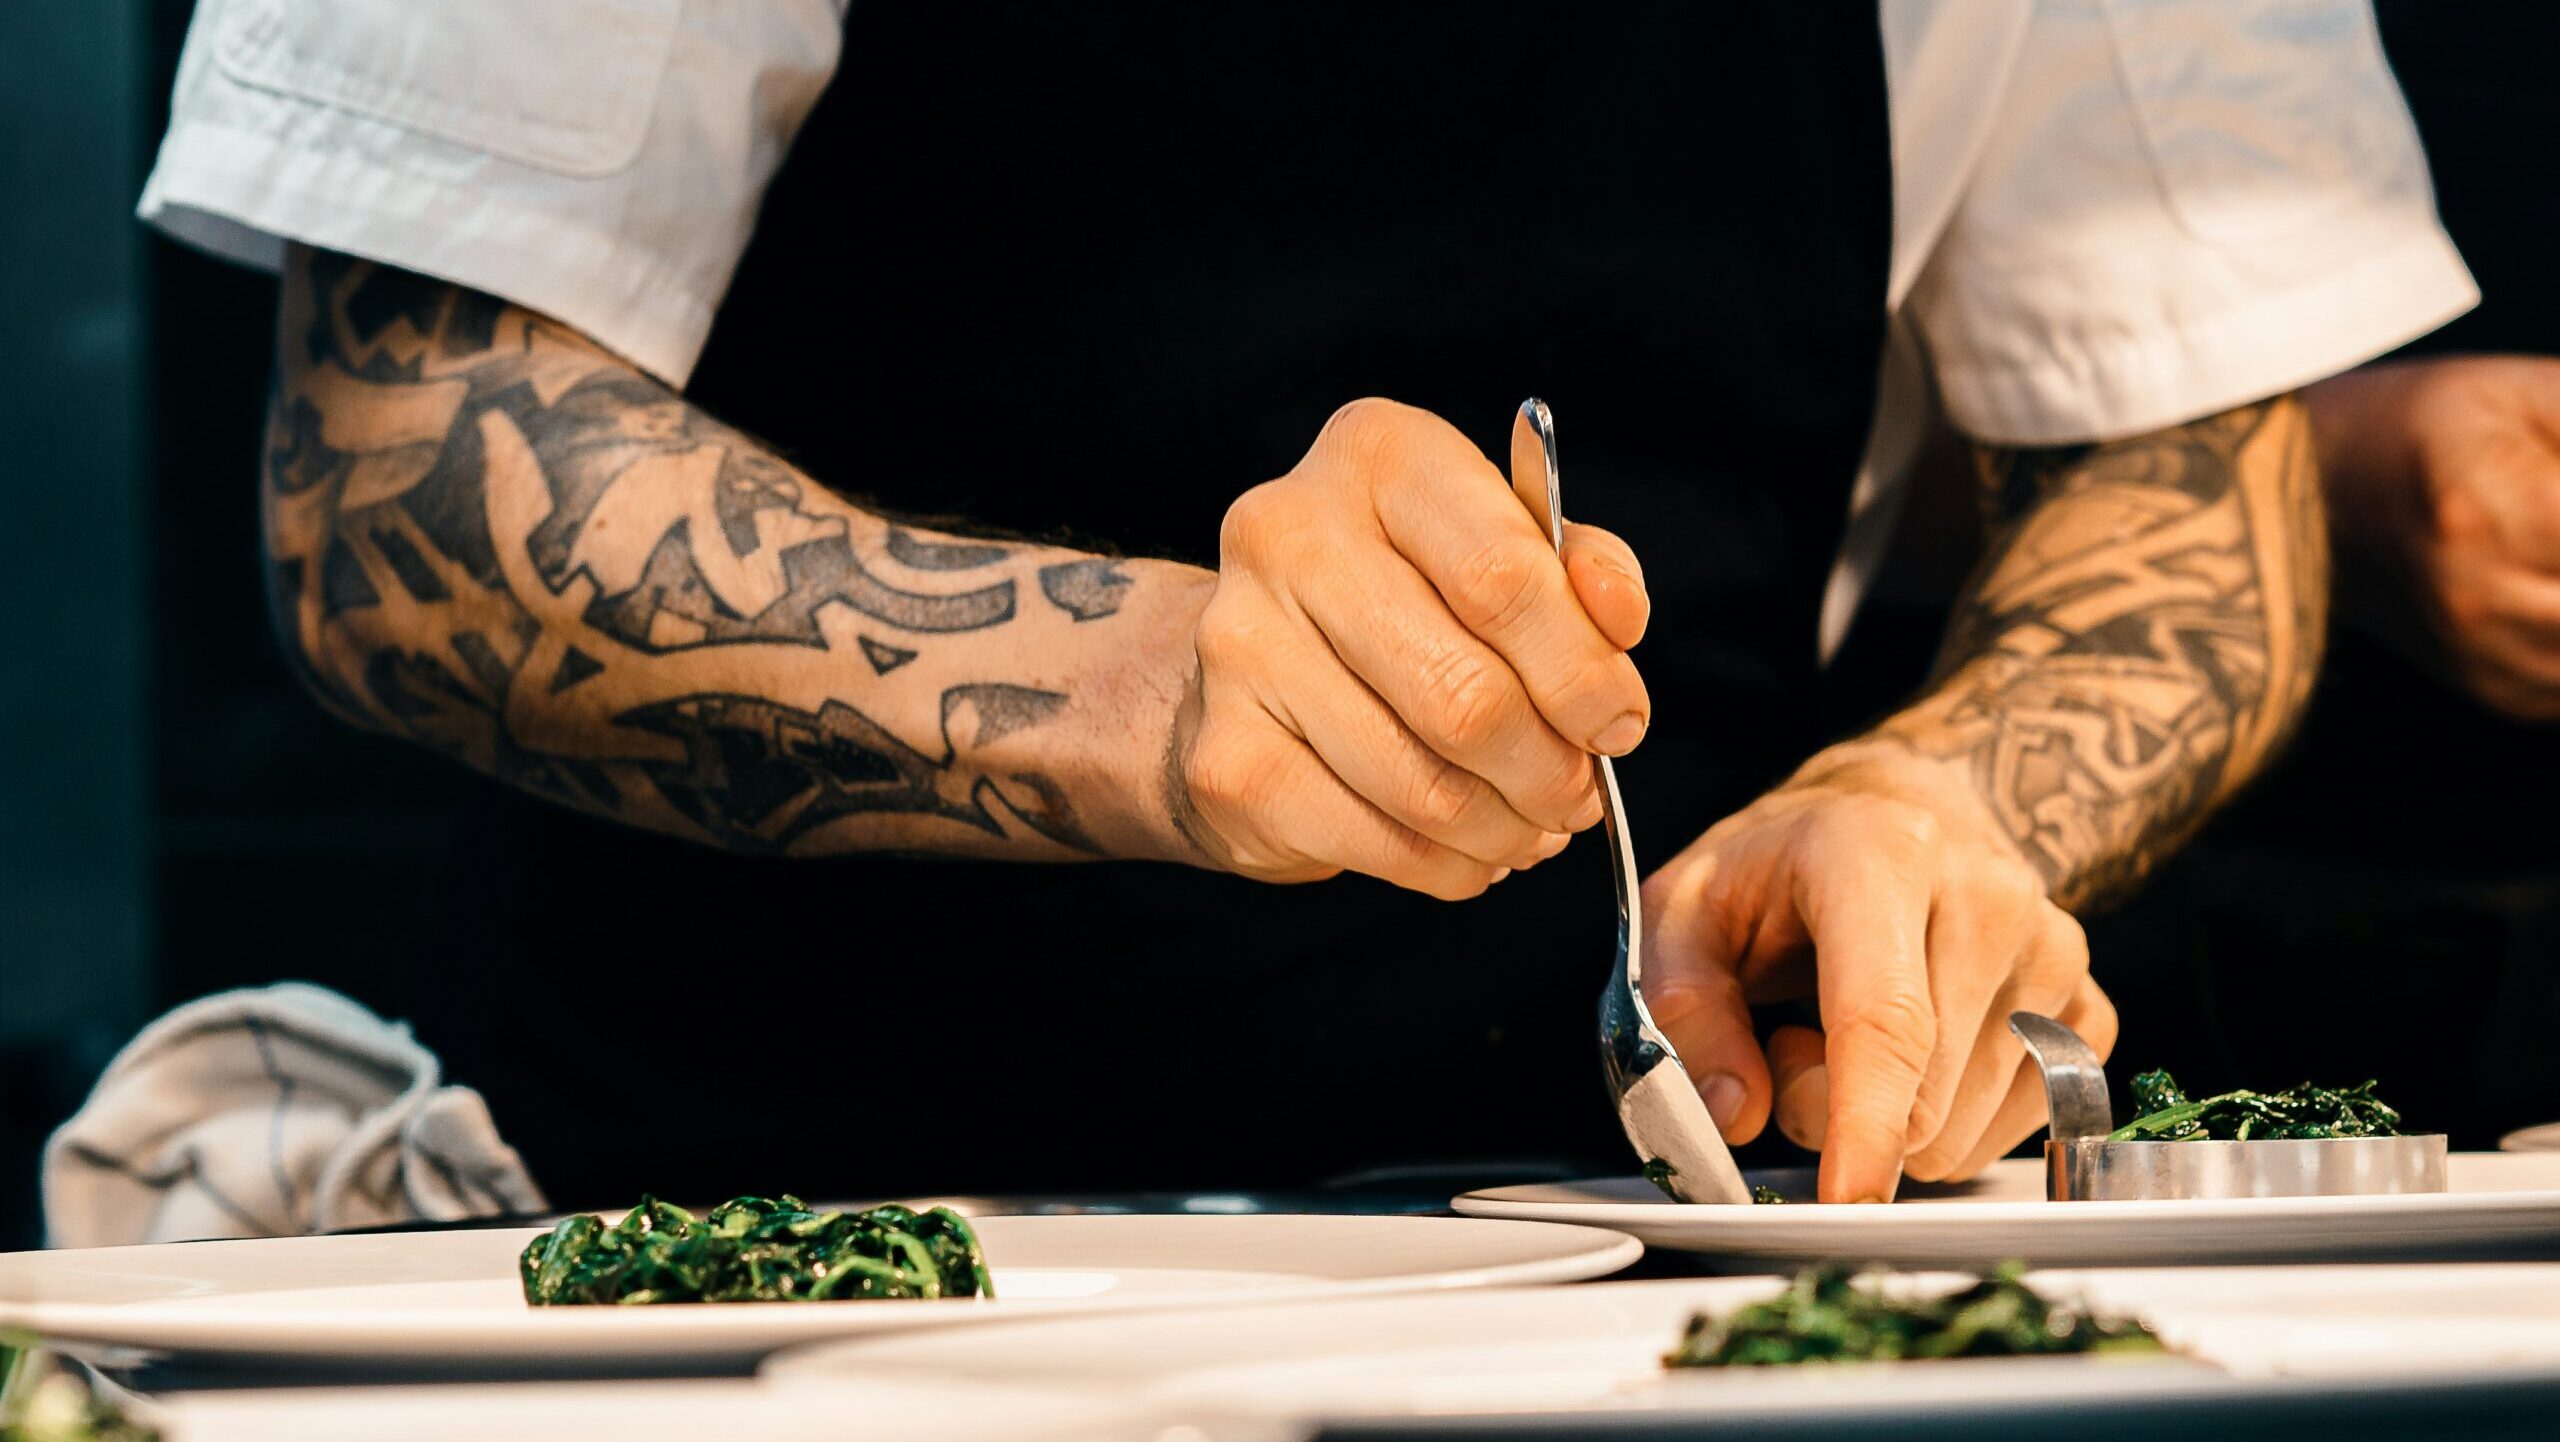 tattooed chef's arms plating up dish